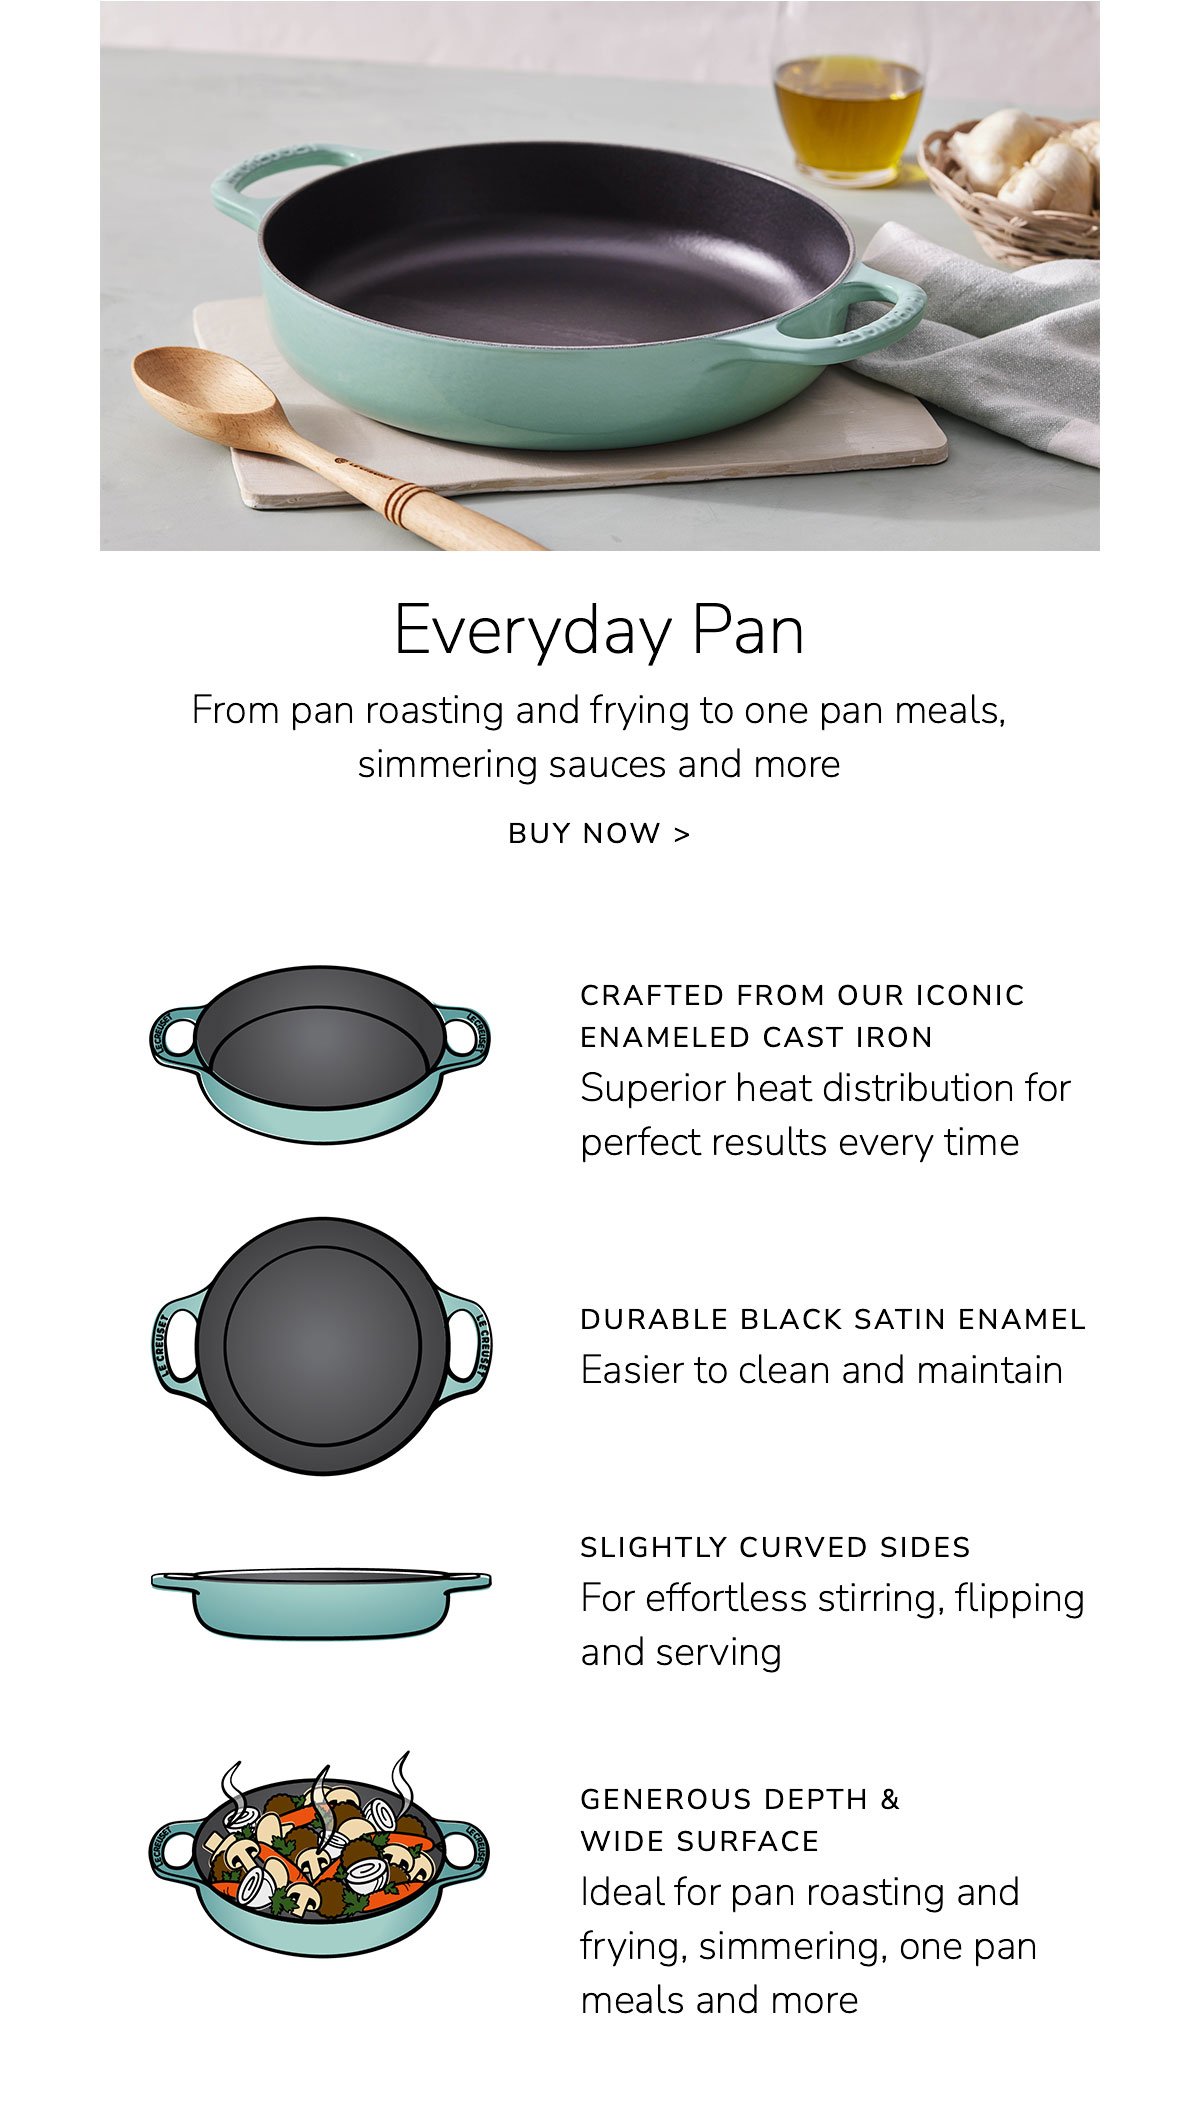 Everyday Pan - From pan roasting and frying to one pan meals, simmering sauces and more - Buy now